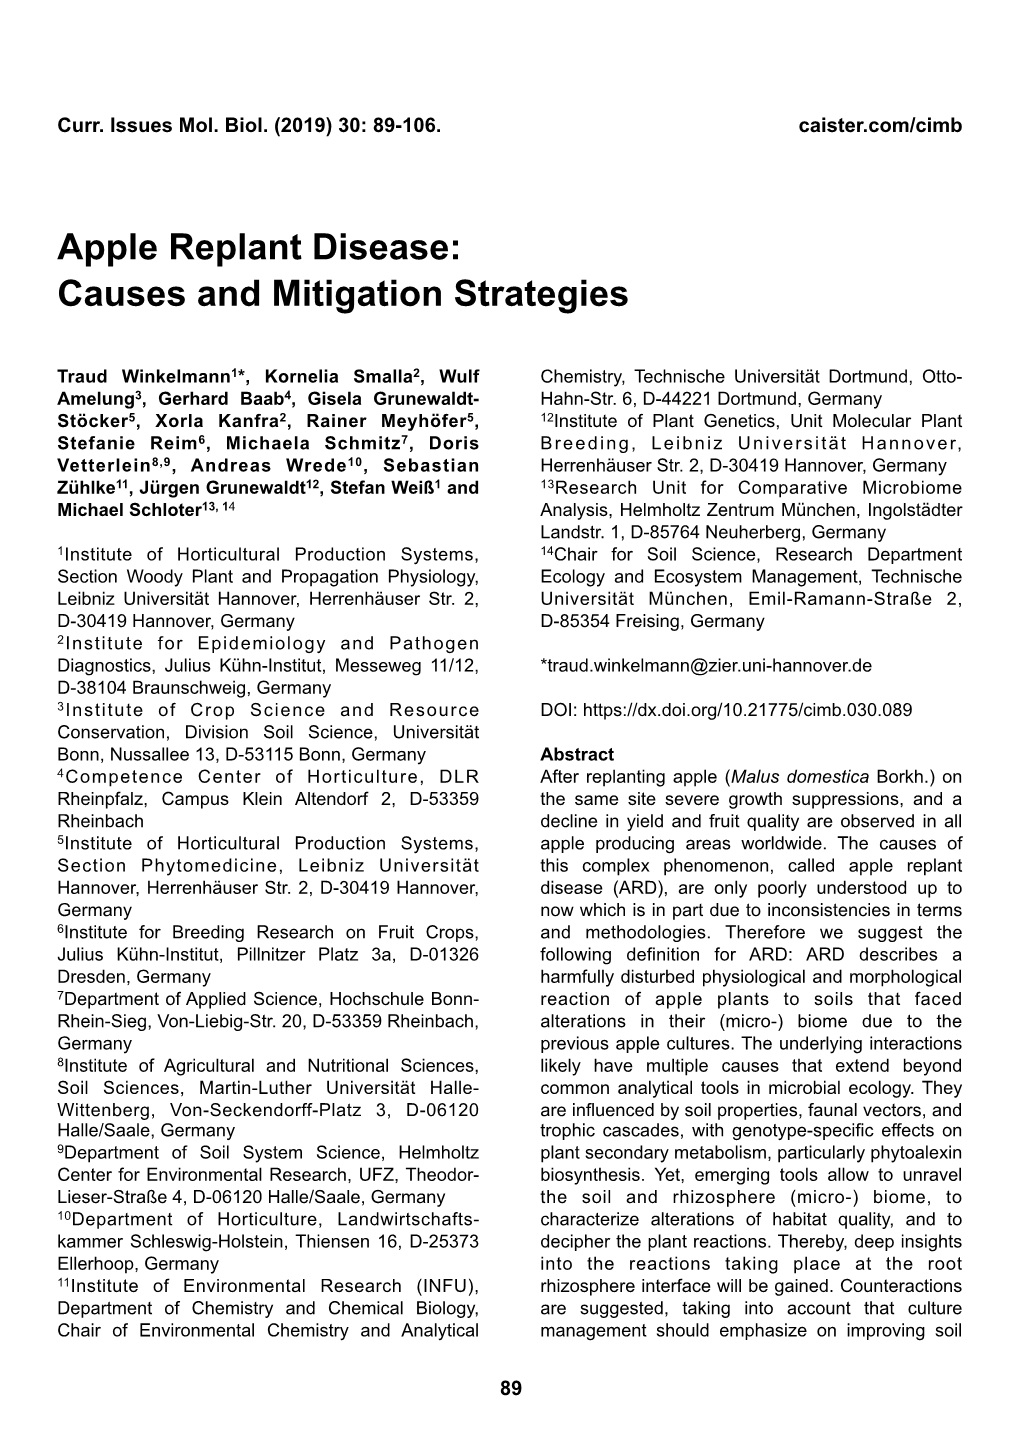 Apple Replant Disease: Causes and Mitigation Strategies